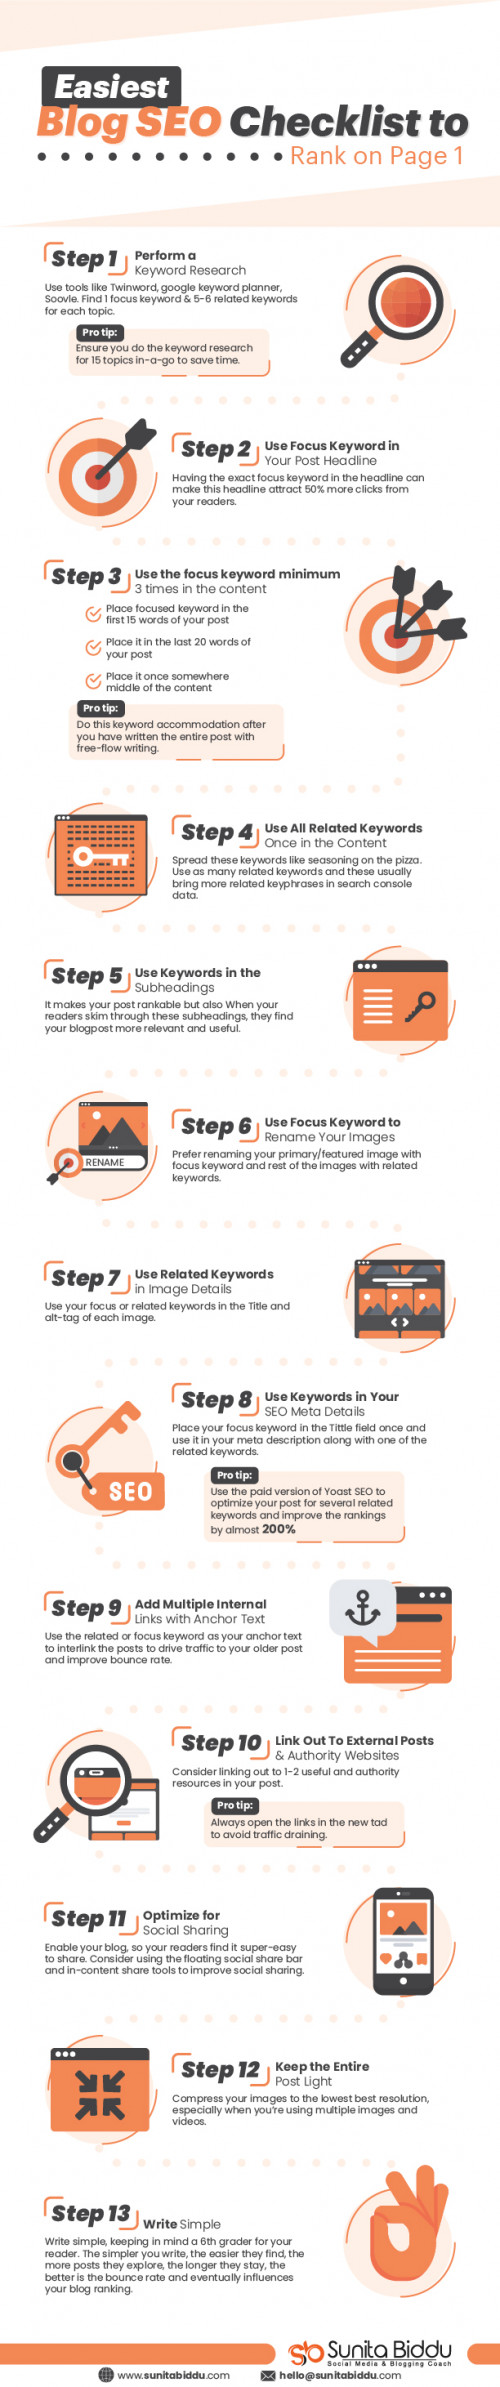 Rank Your Blog Fast on Page 1 with Blog SEO Checklist Infographic